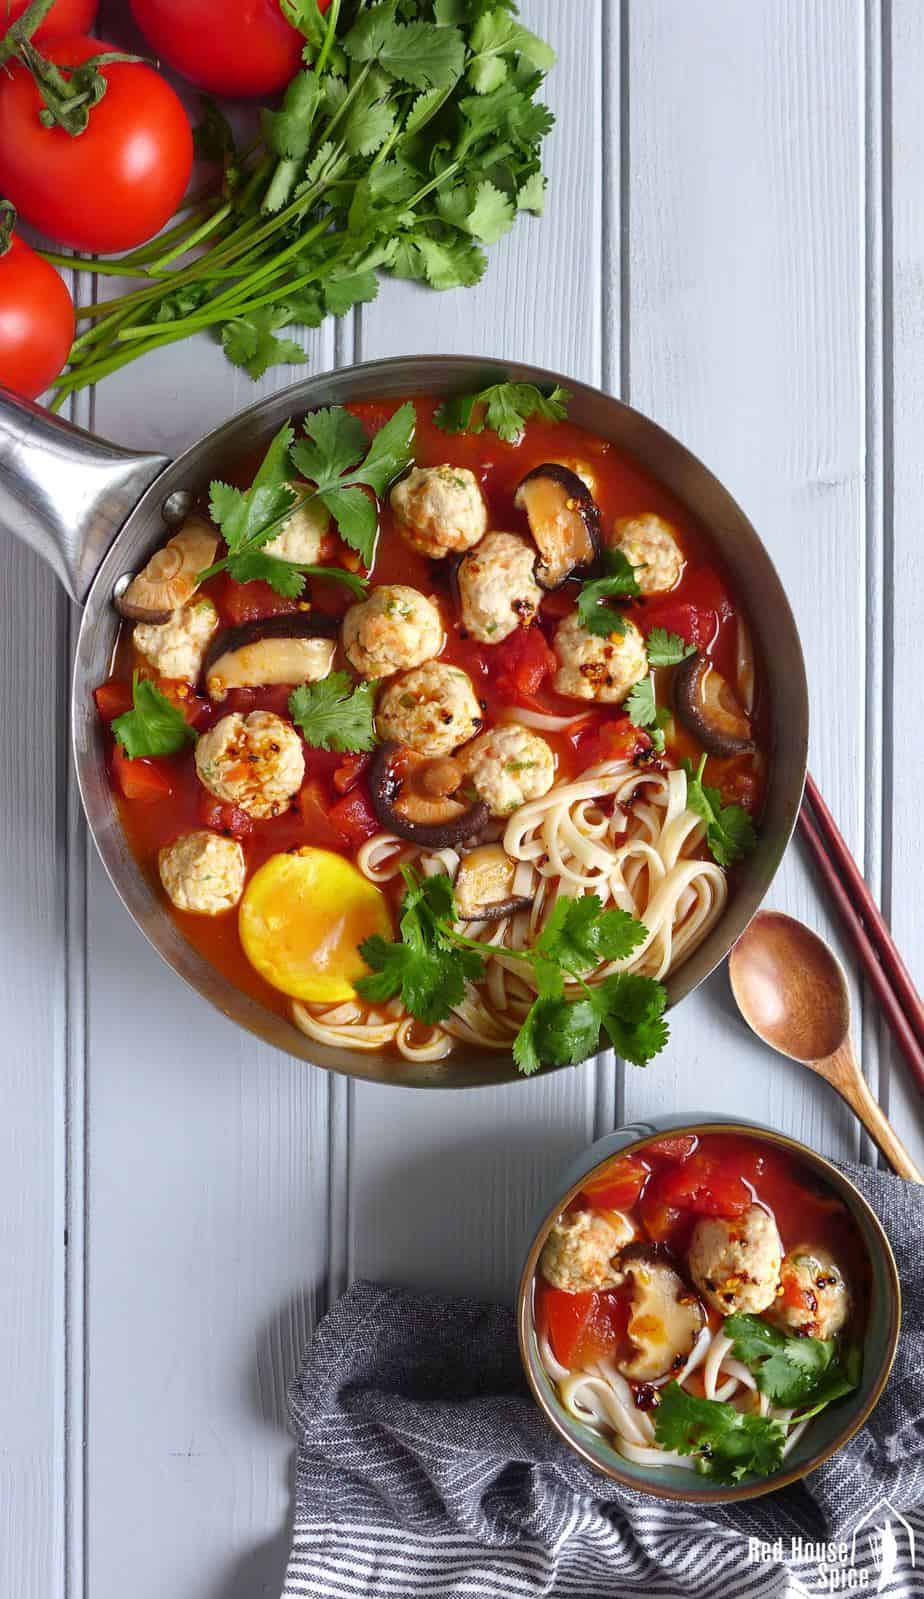 Tender and springy meatballs cooked in tomato and shiitake soup. This chicken meatball noodle soup is super tasty, filling and healthy.